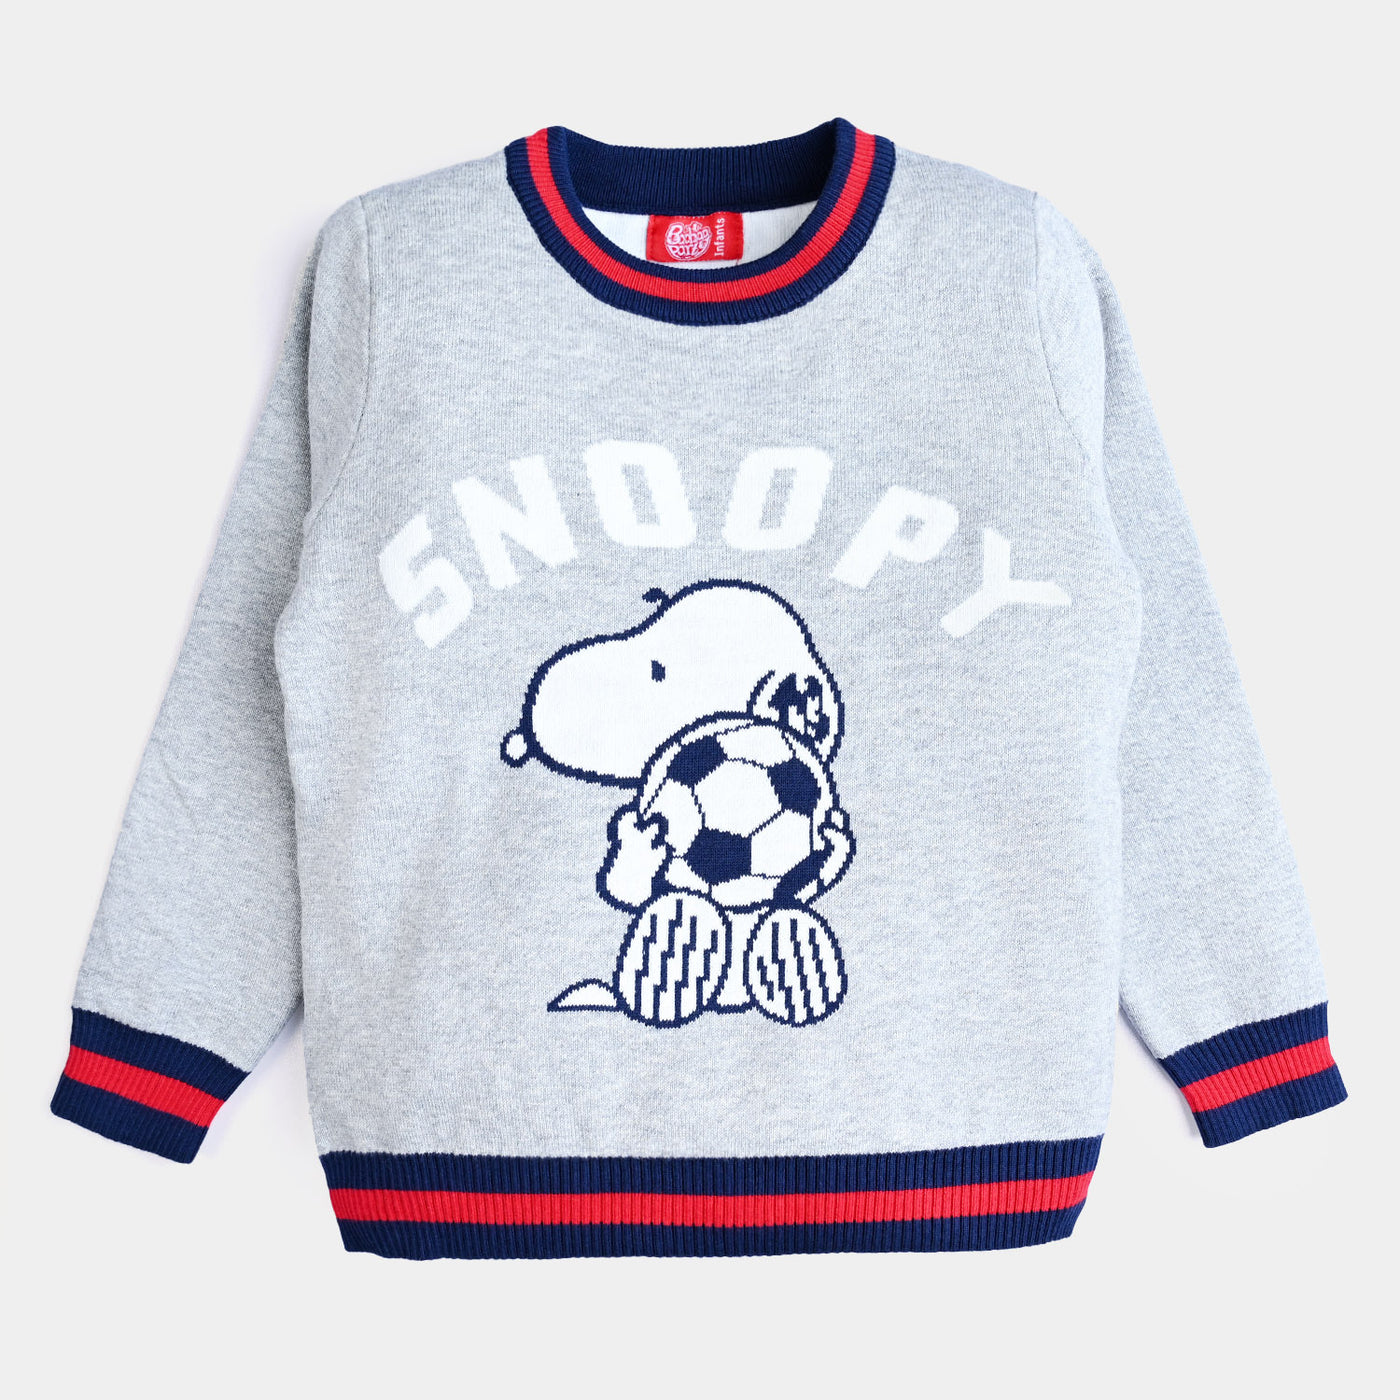 Boys Knitted Sweater Character - Grey